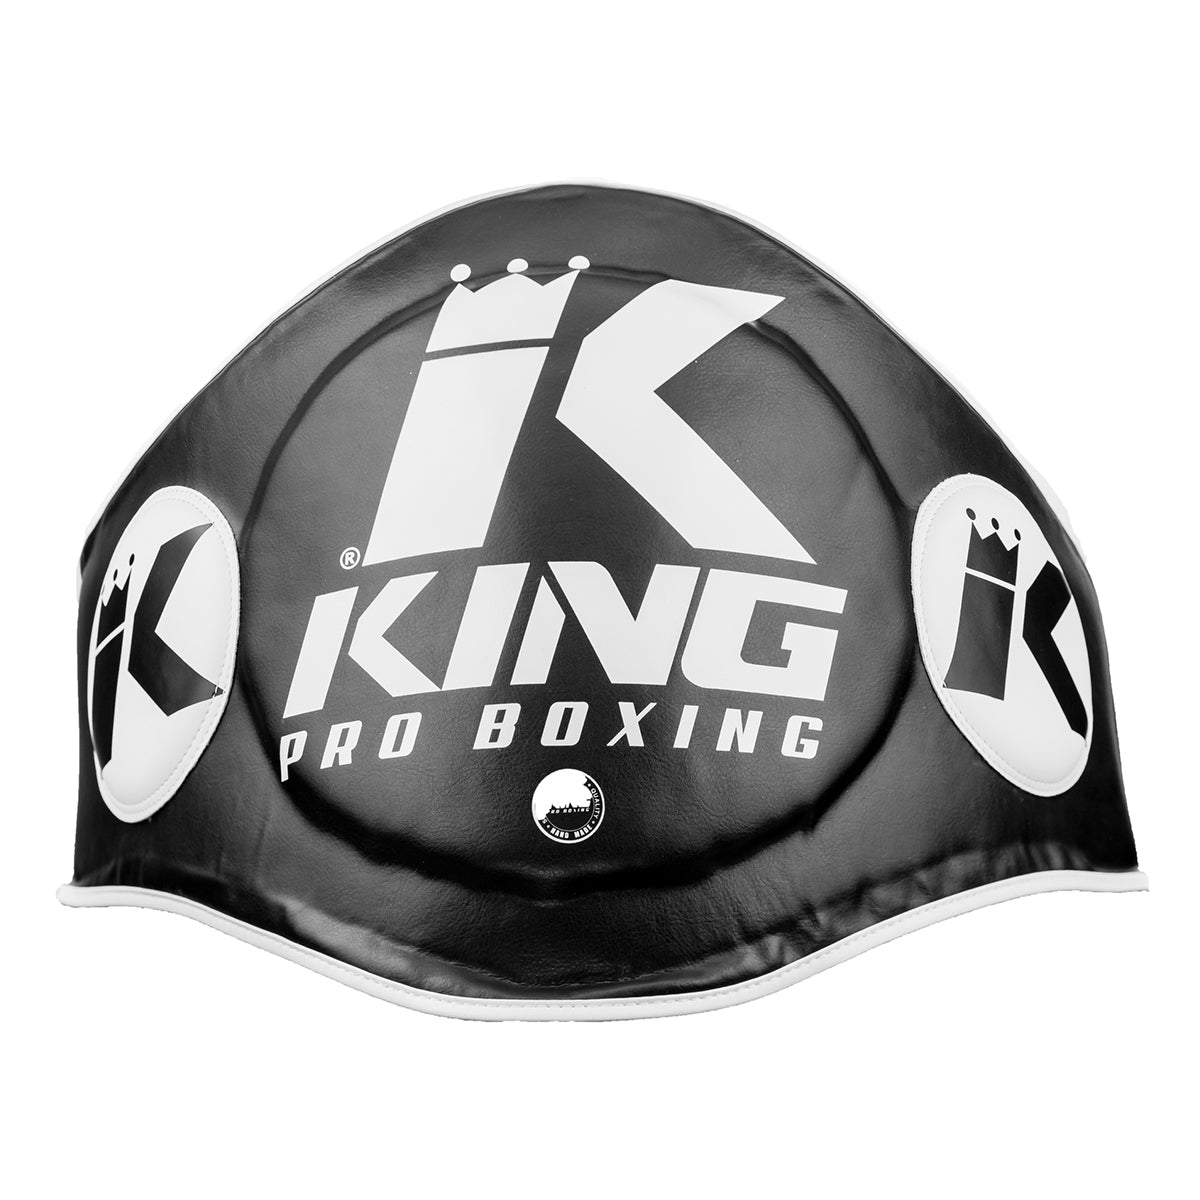 King PRO boxing Belly pad - BP